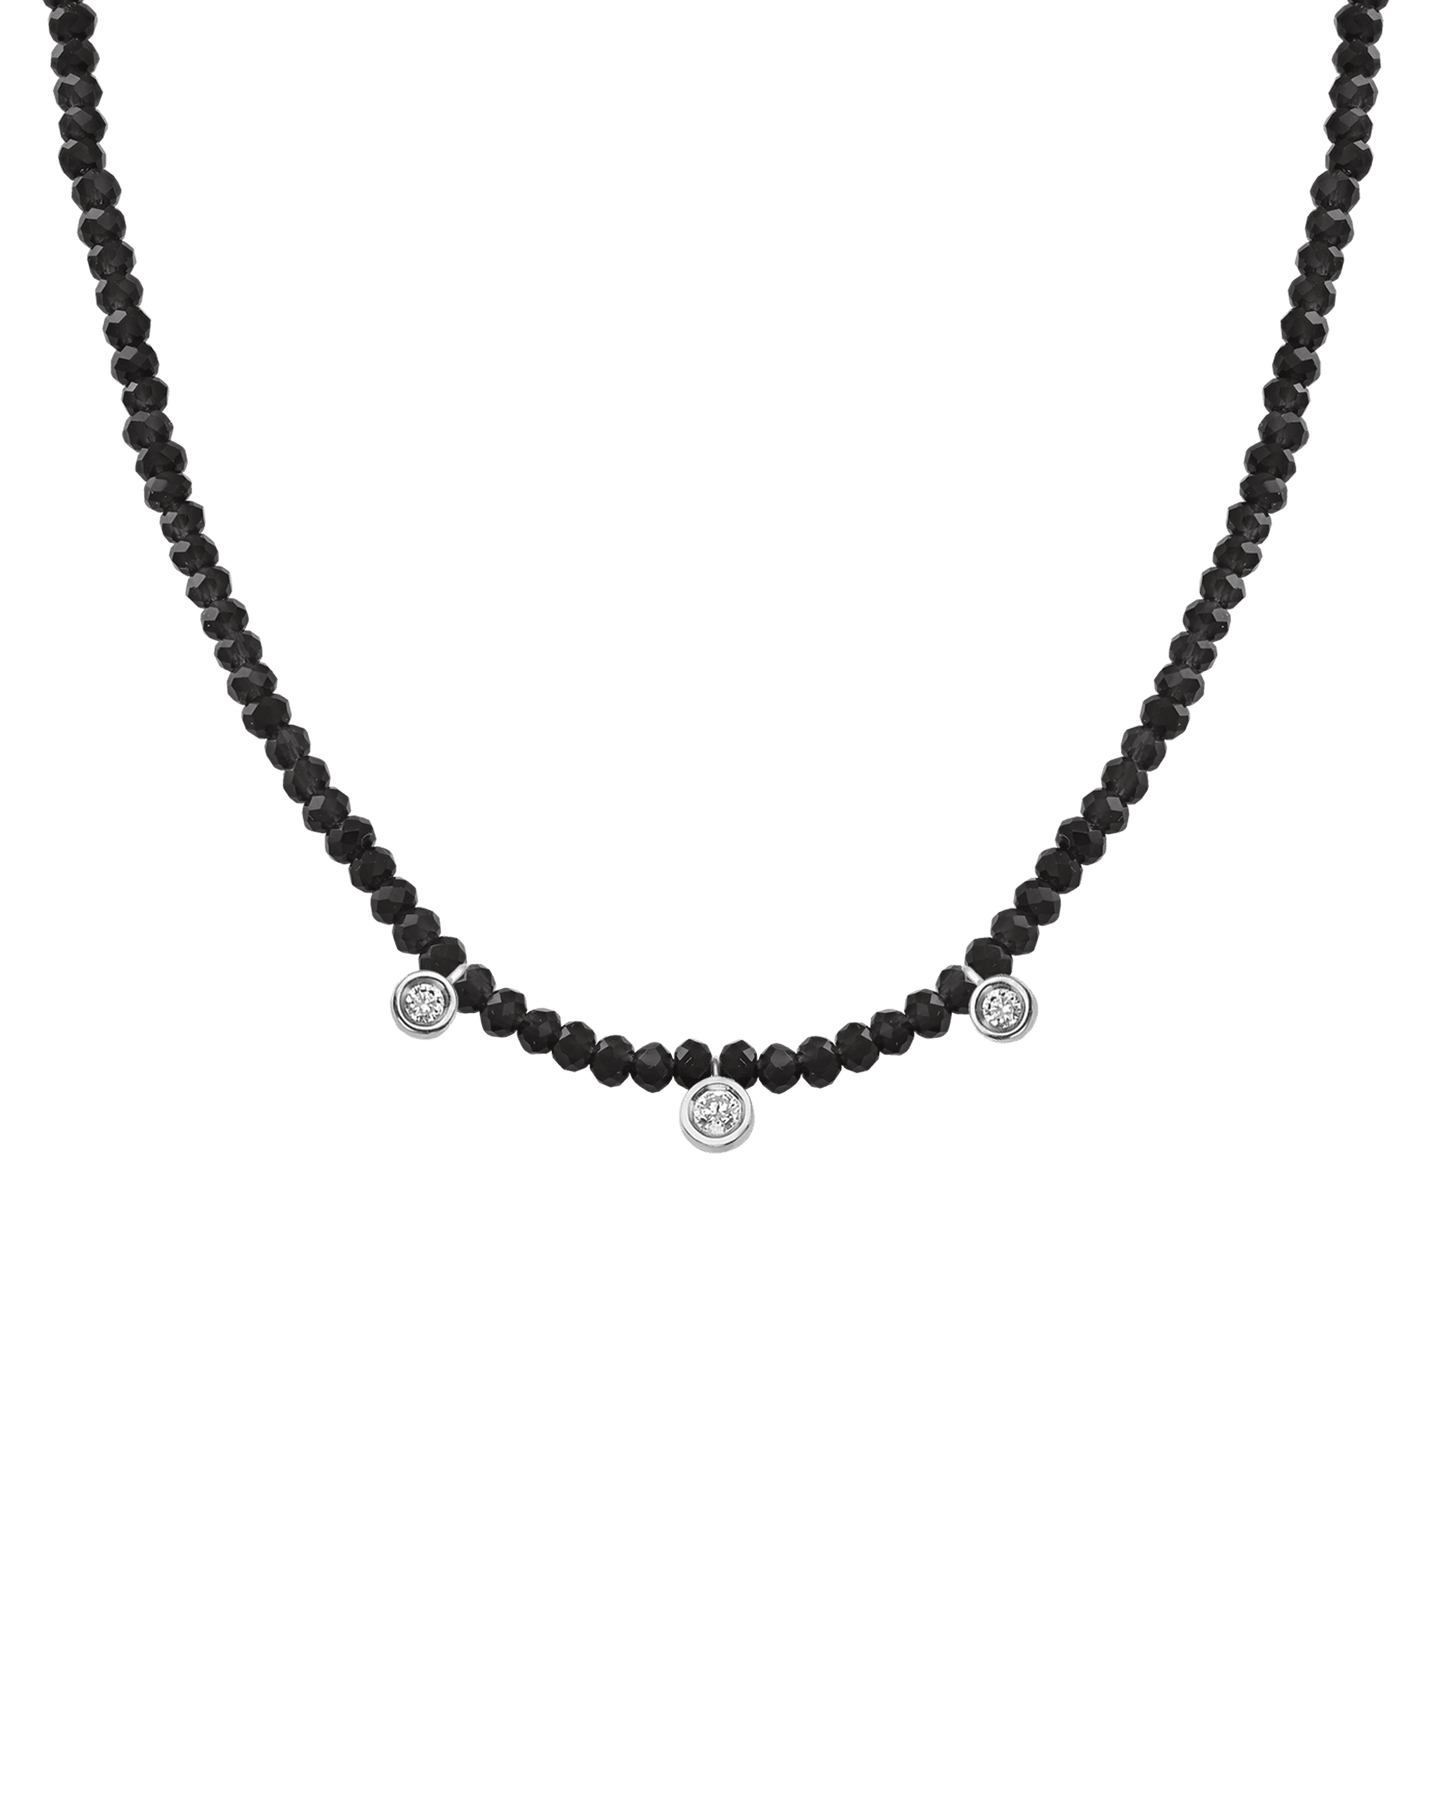 Apatite Gemstone & Three diamonds Necklace - 14K White Gold Necklaces magal-dev Glass Beads Black Spinnel 14" - Collar 